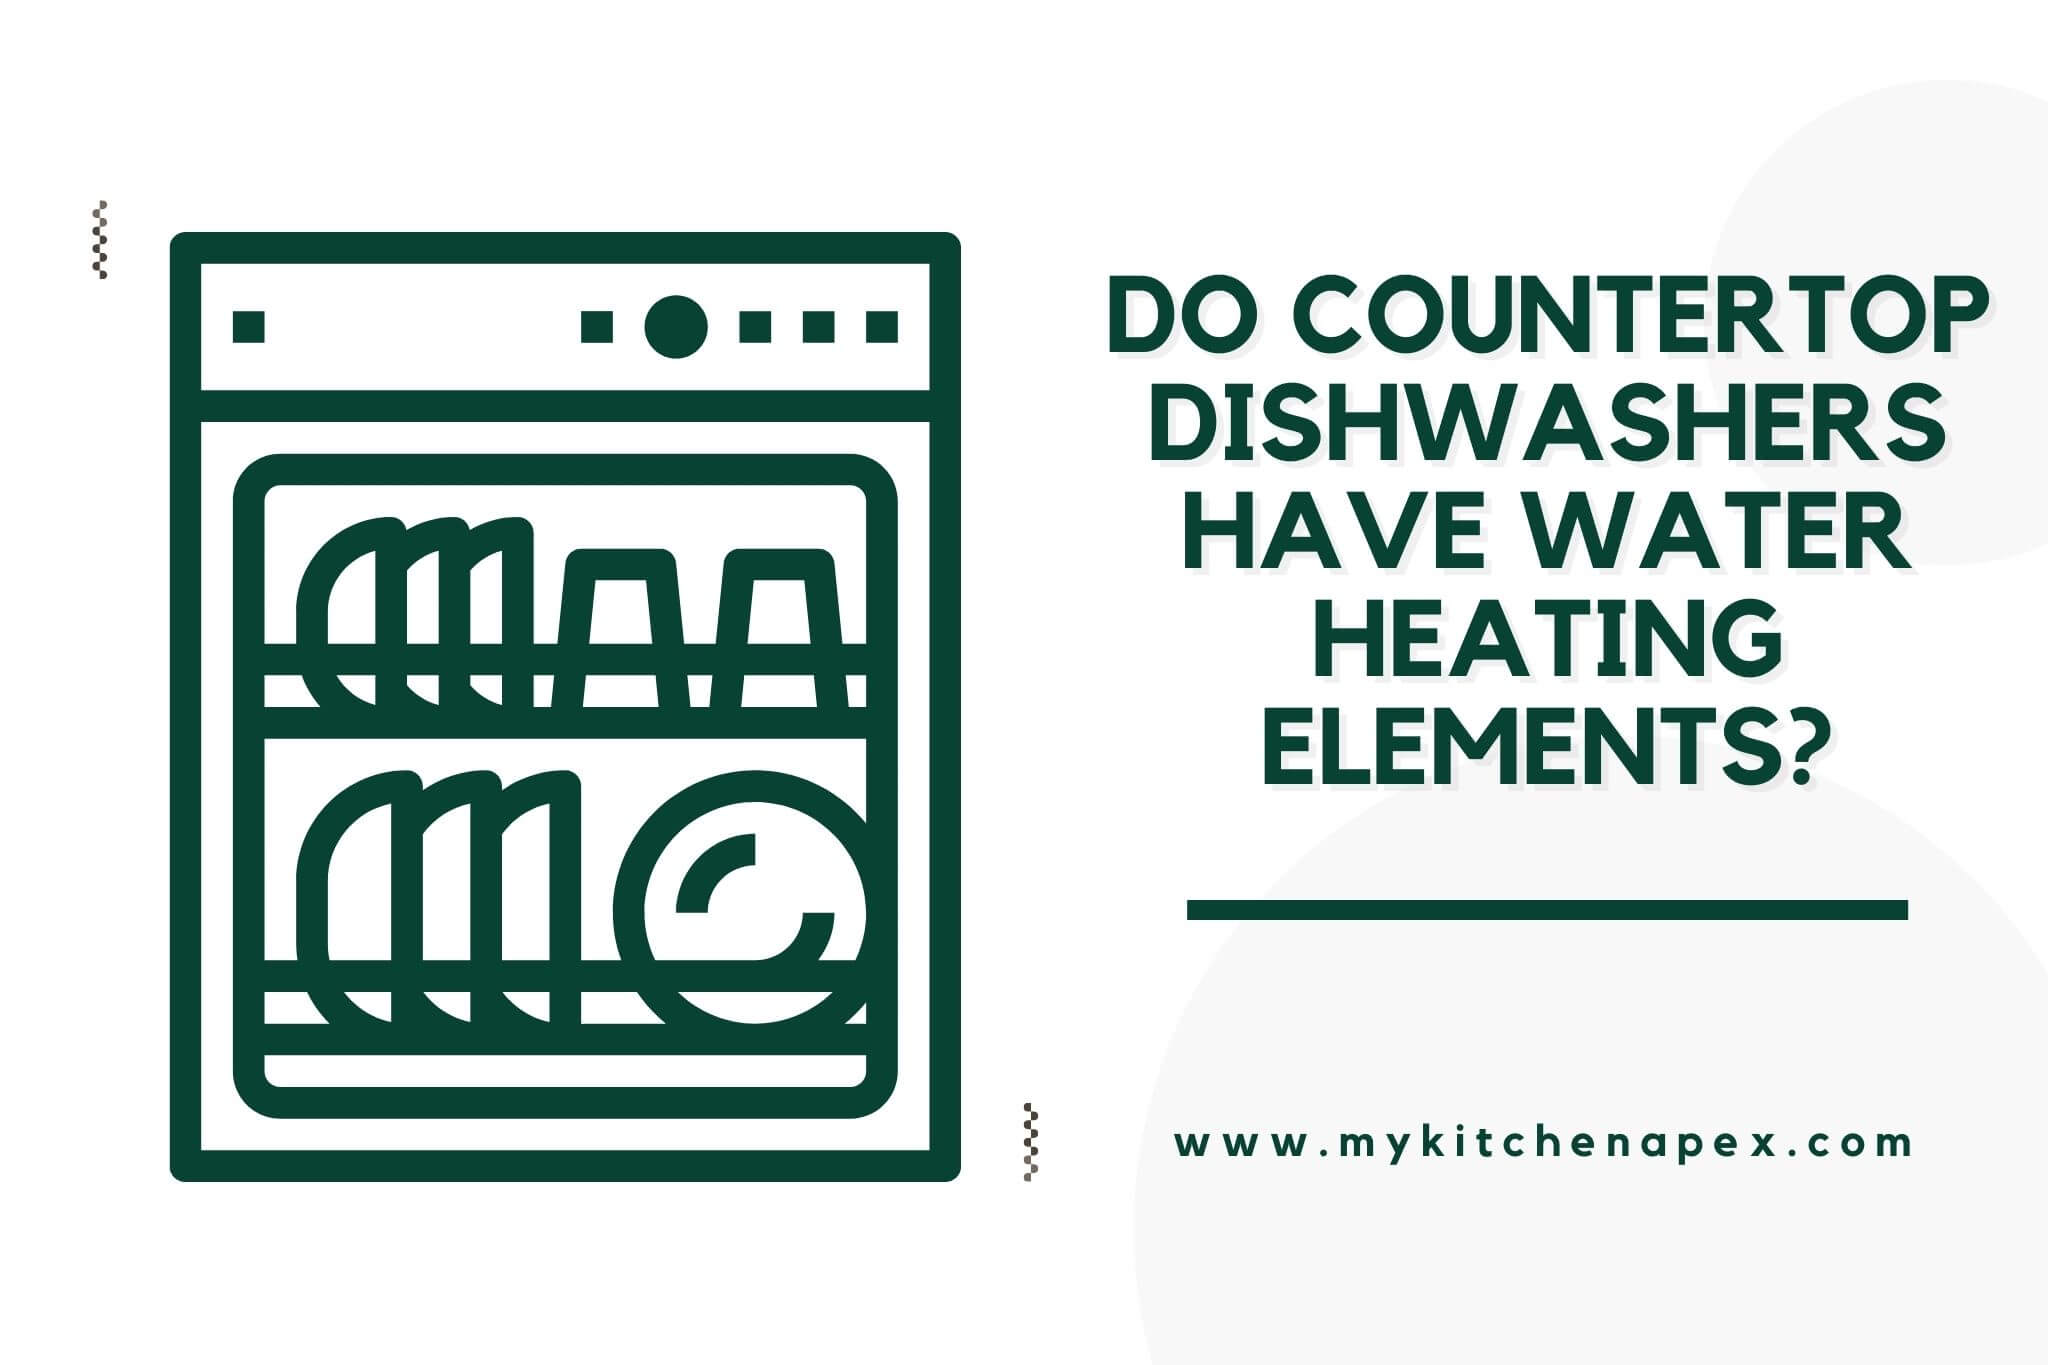 Do Countertop Dishwashers Have Water Heating Elements